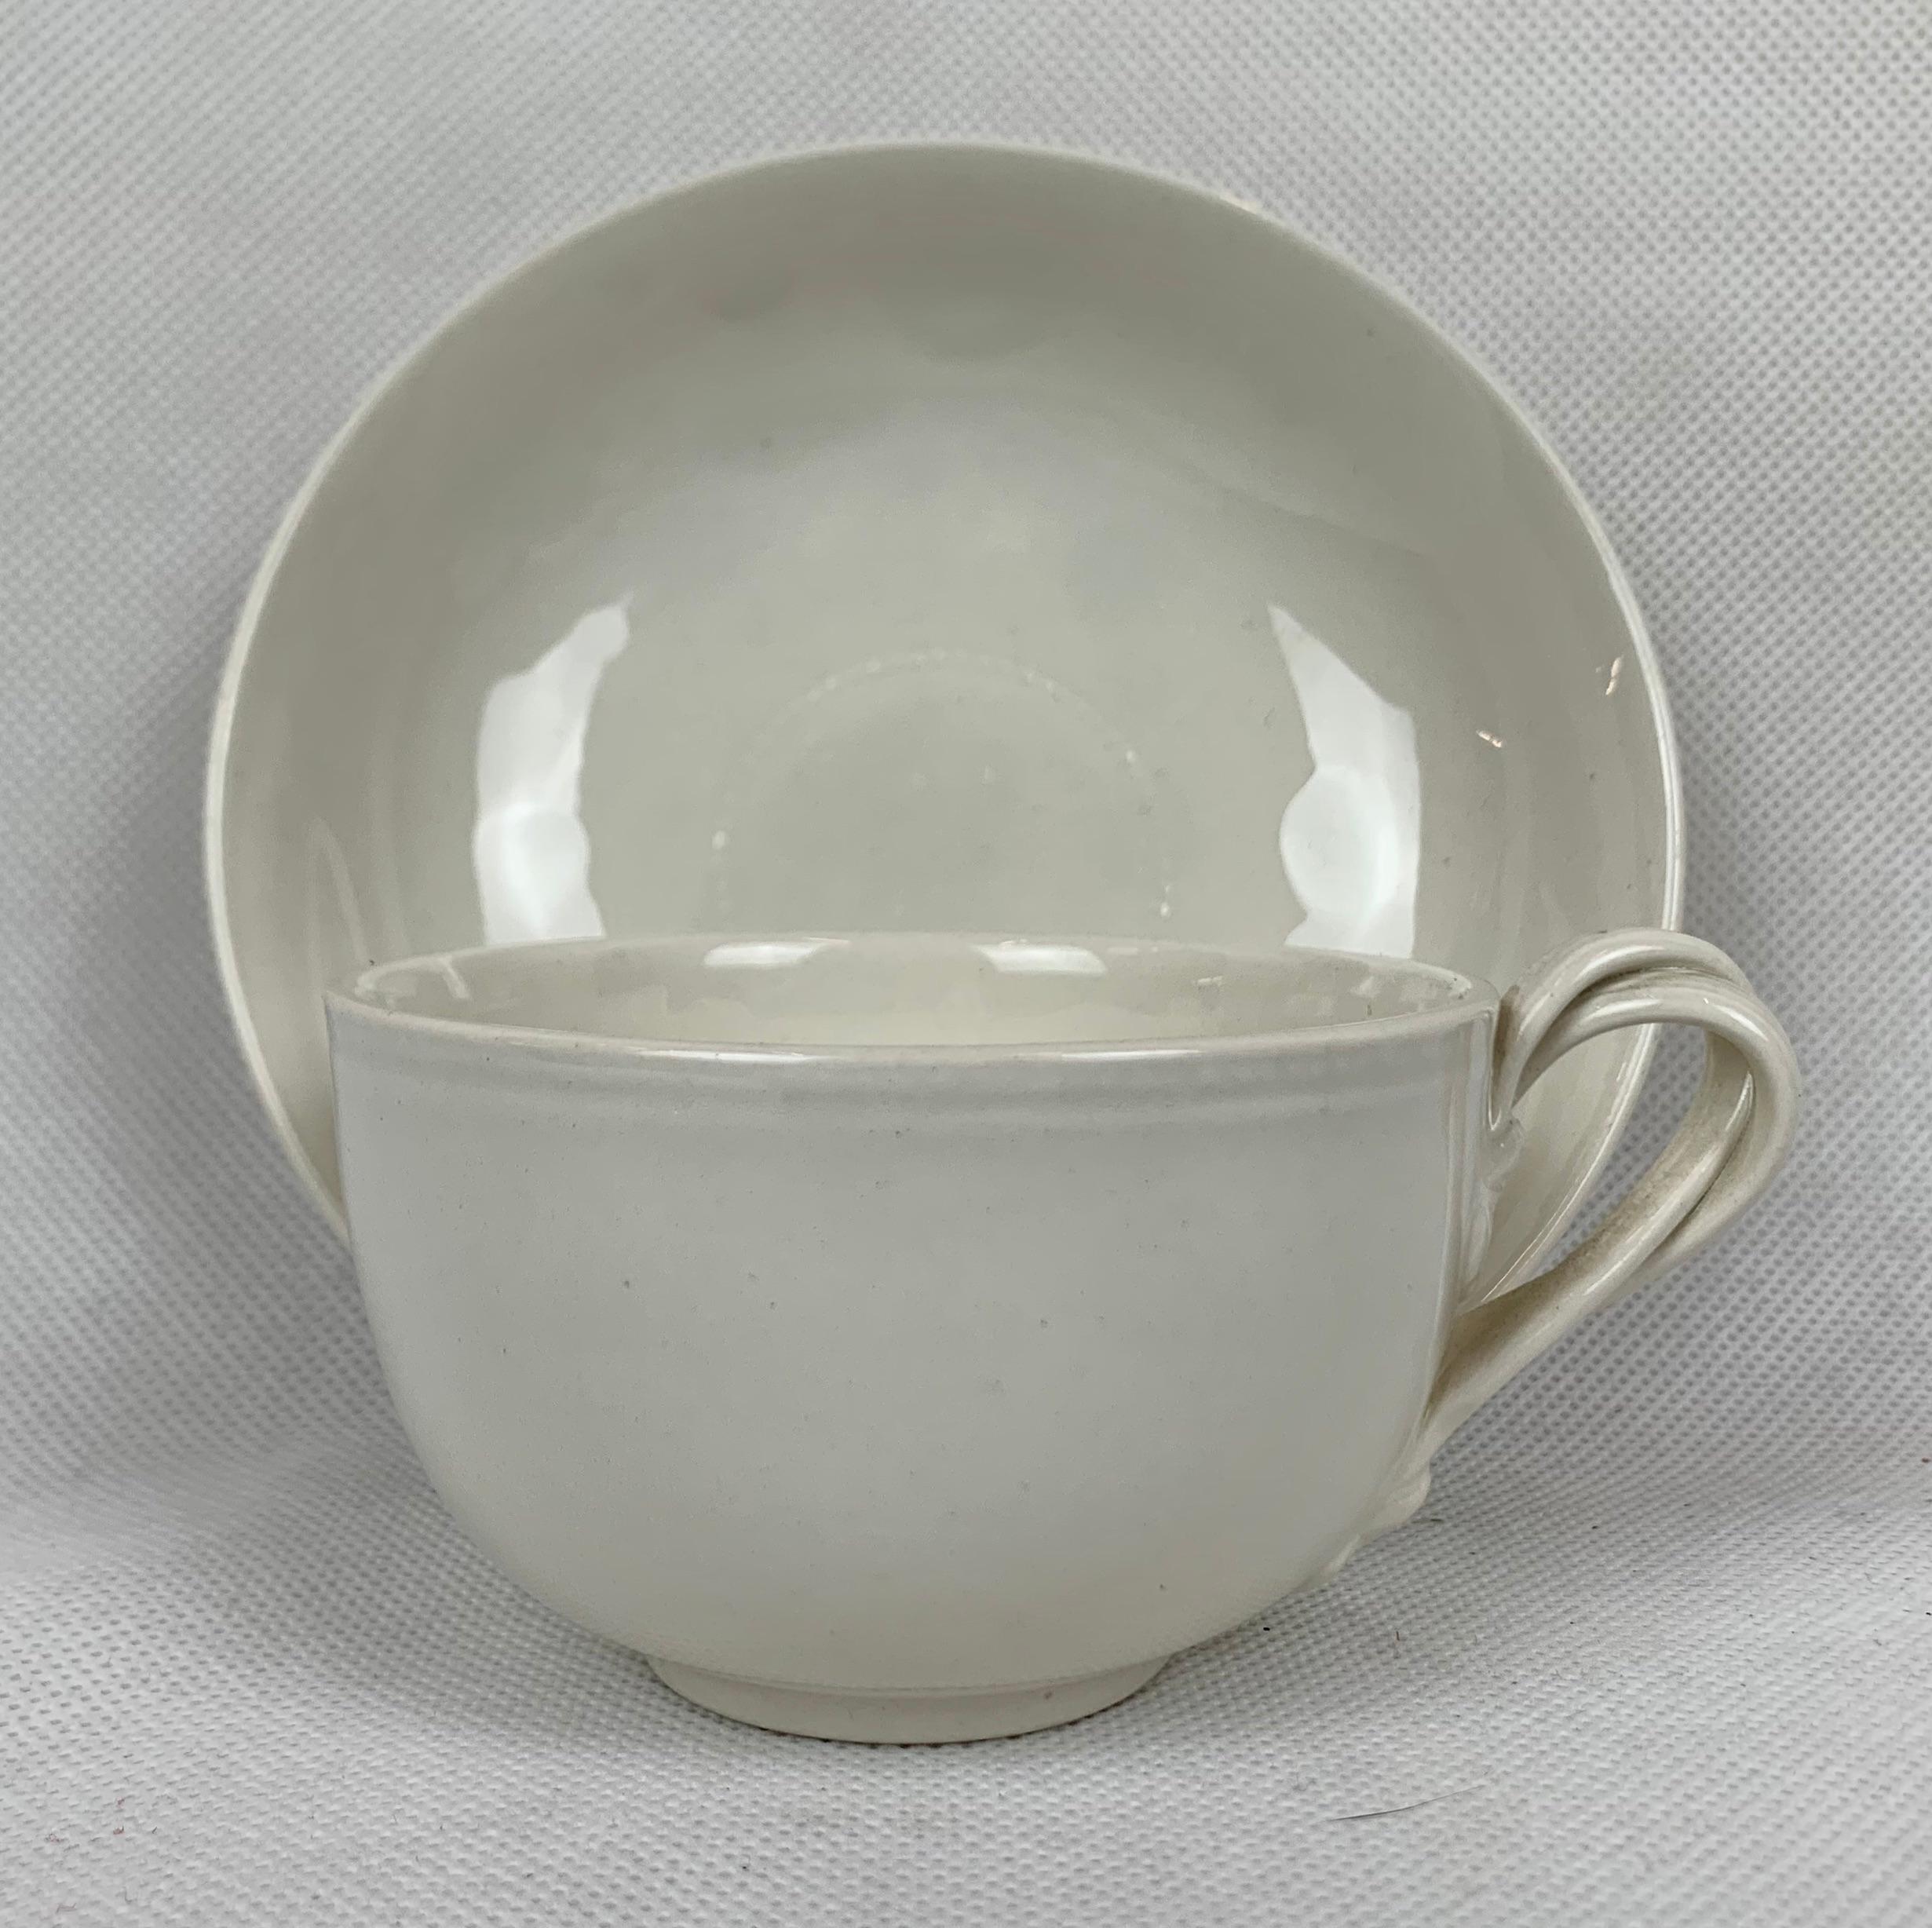 English Authentic Leedsware Cups and Saucers with Double Strap Handles-Set of Six 